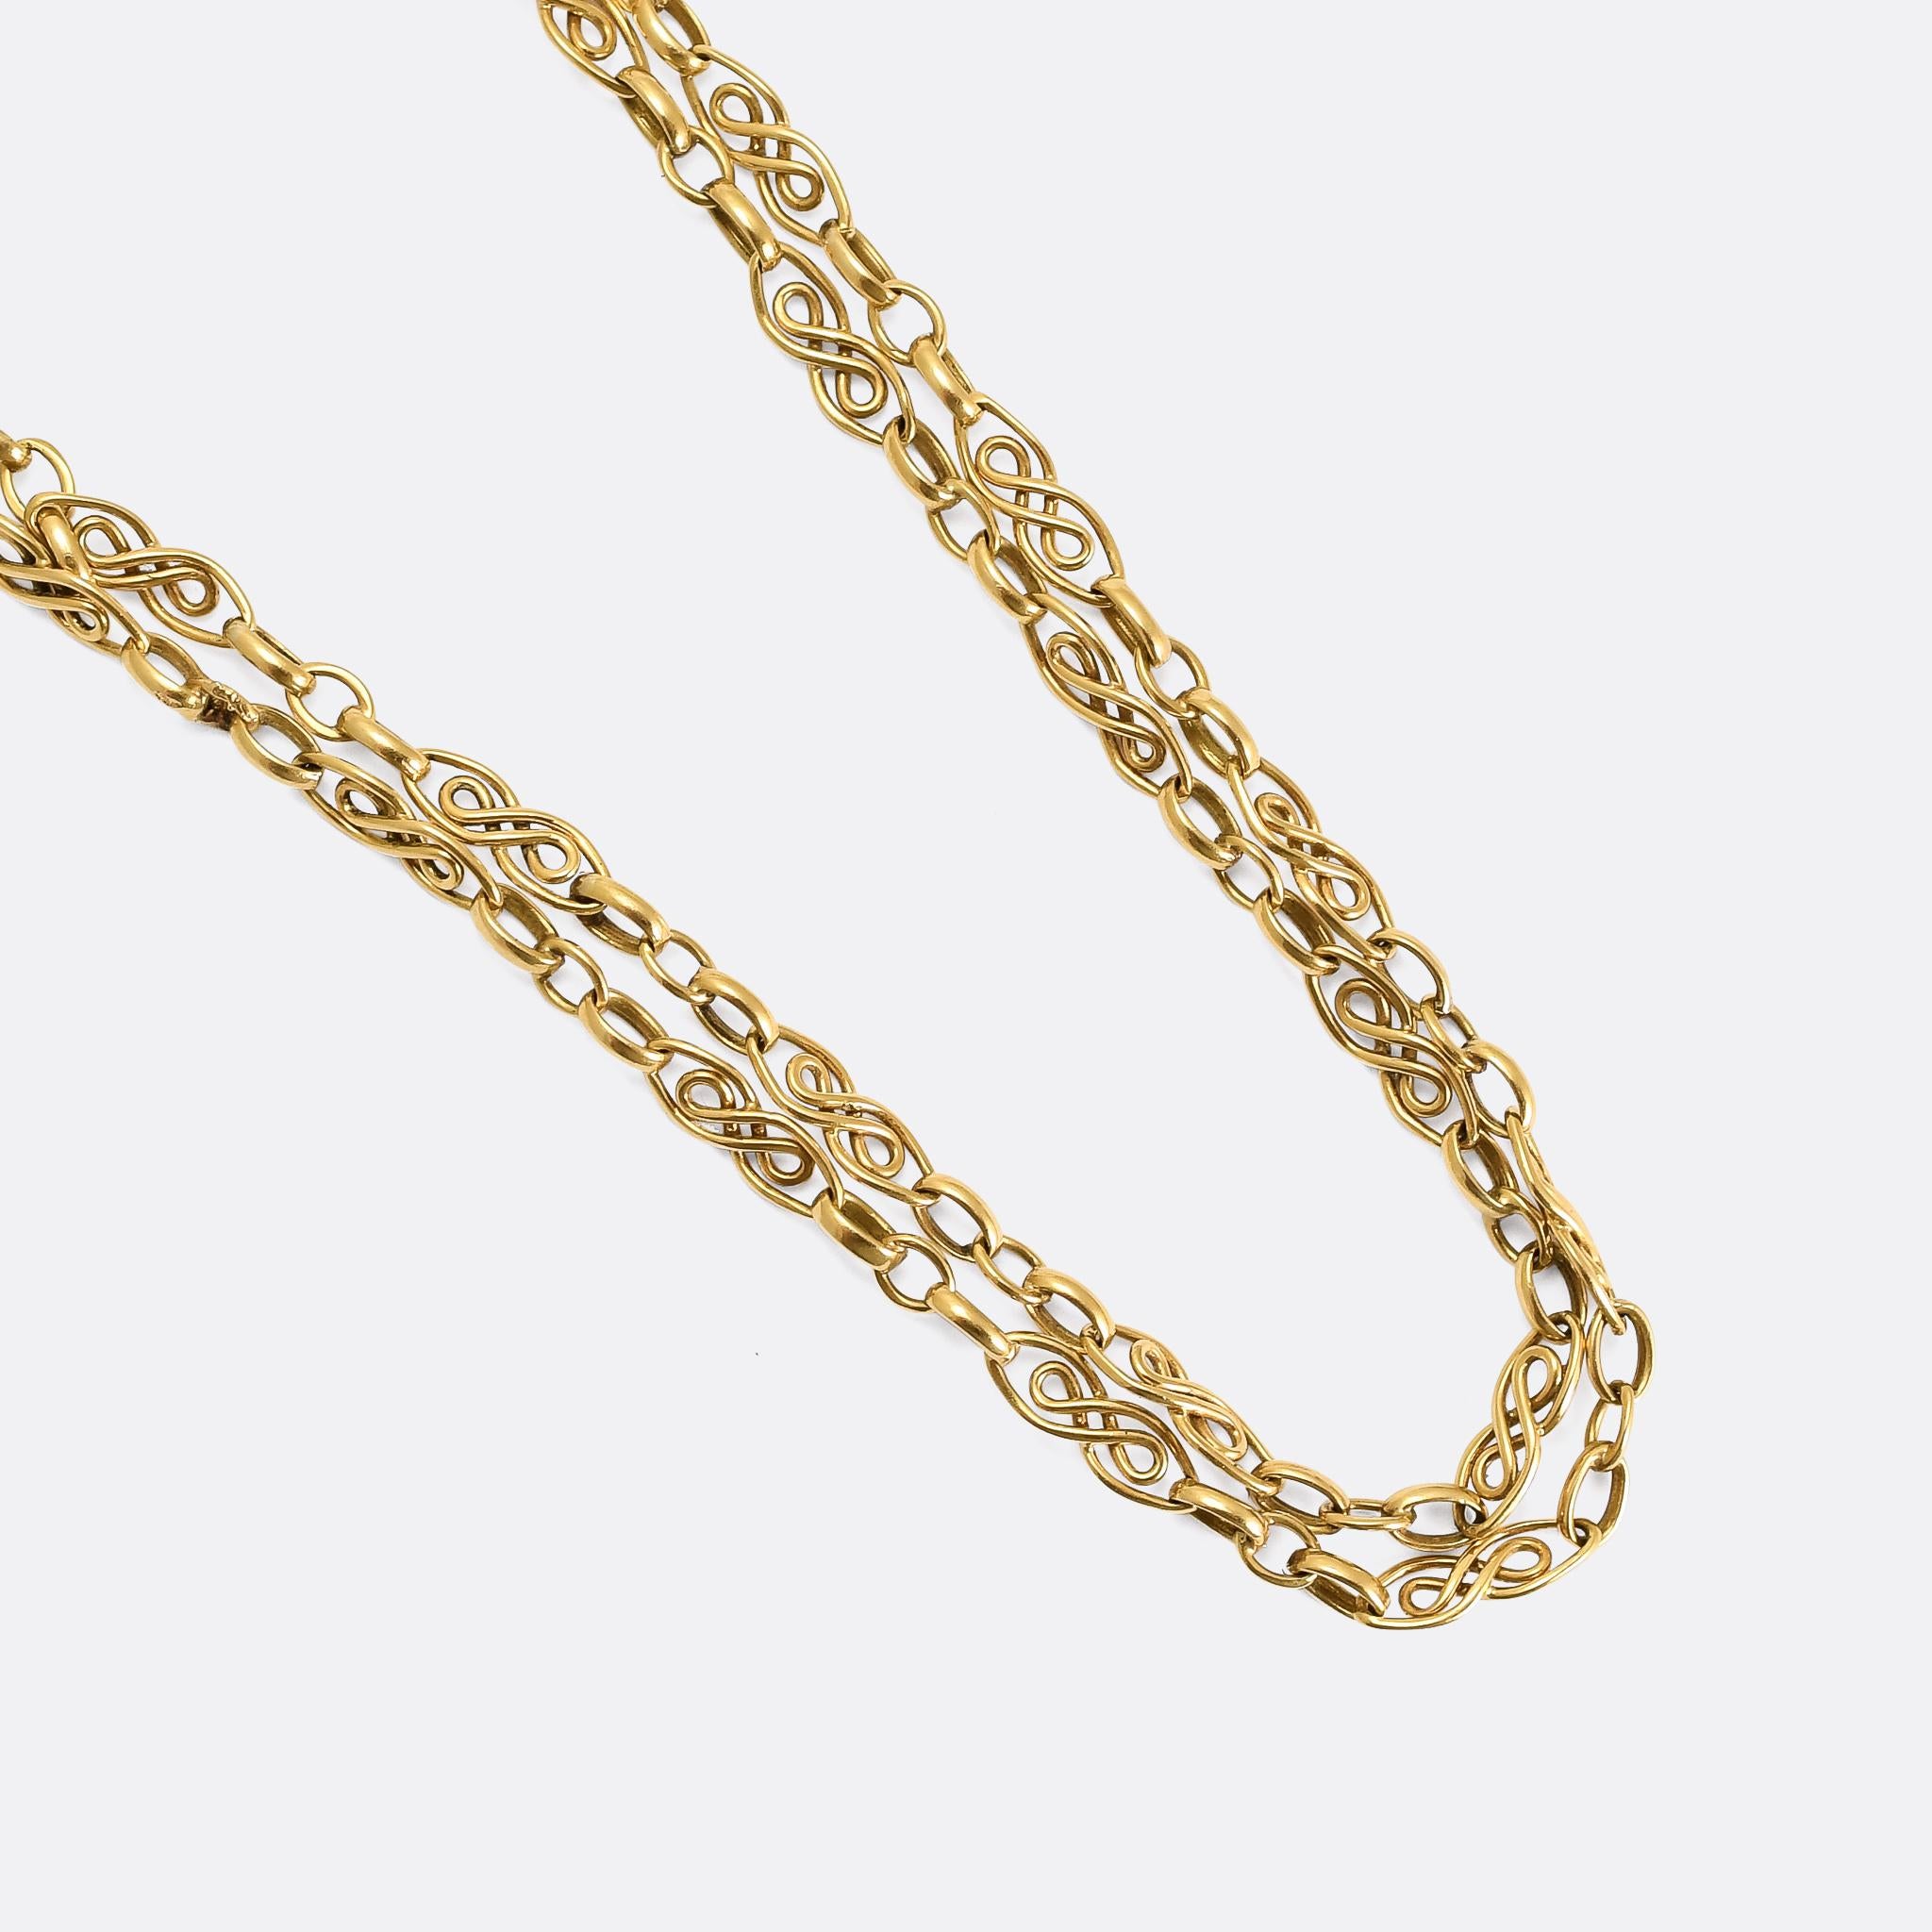 An incredible, finely worked antique guard chain dating from the late Victorian era, circa 1890. It's French, crafted in 18 karat gold, and features beautiful swirling gold links and a ring bolt clasp to add charms or a pendant. Fully hallmarked and